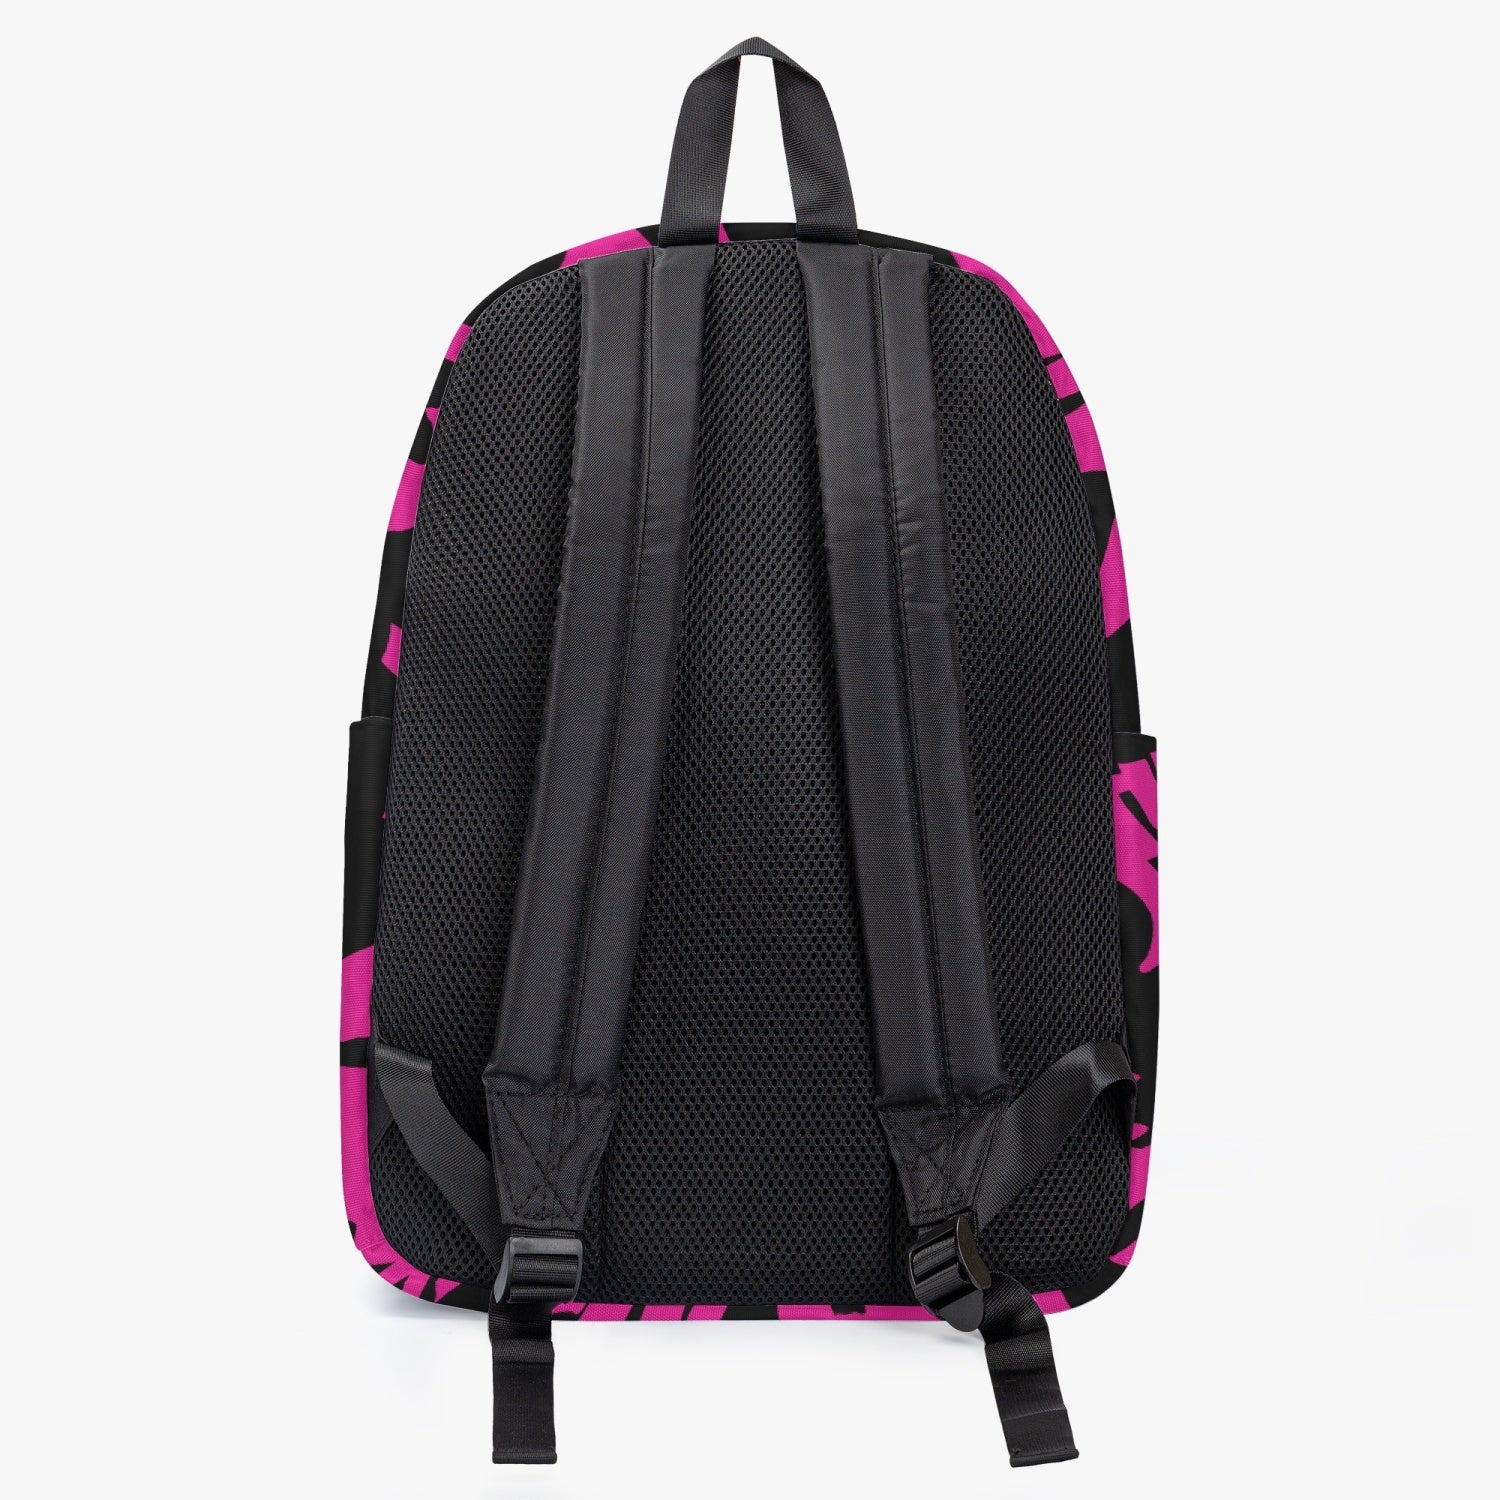 THE TAG BLACK & HOT PINK CANVAS BACKPACK - Panic 39